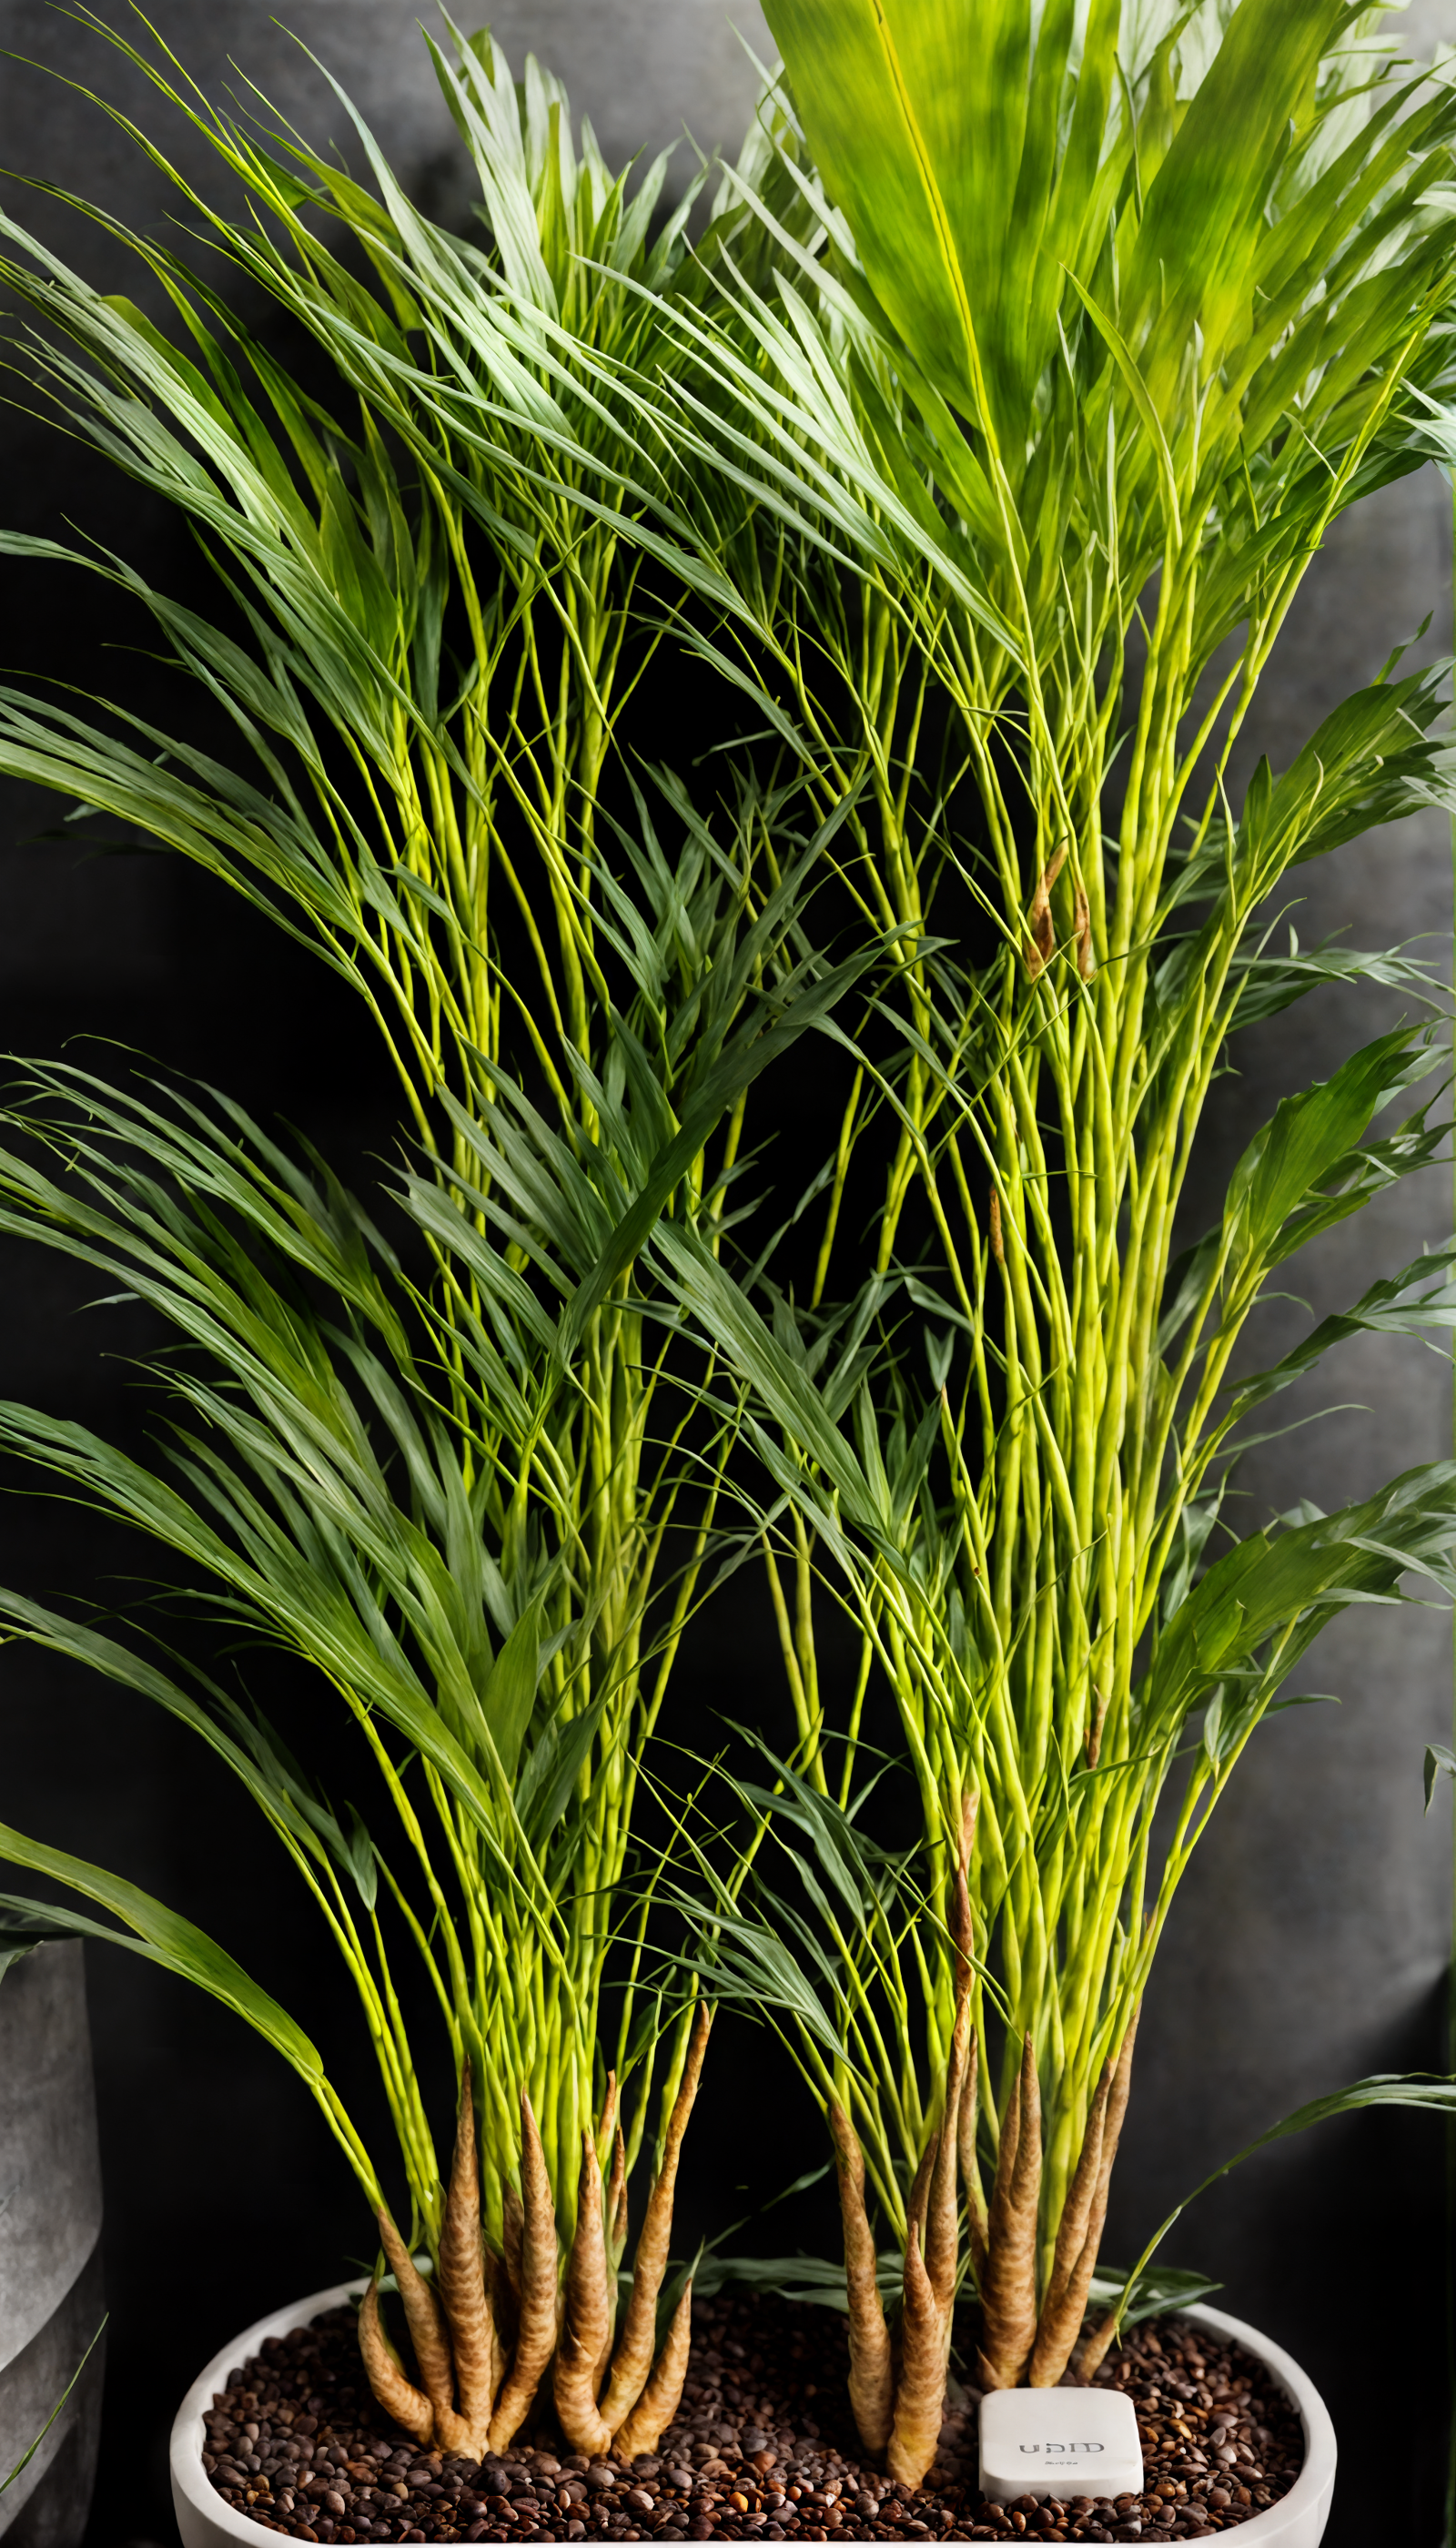 Dypsis lutescens in a vase, with lush foliage, against a dark background in a well-lit room.